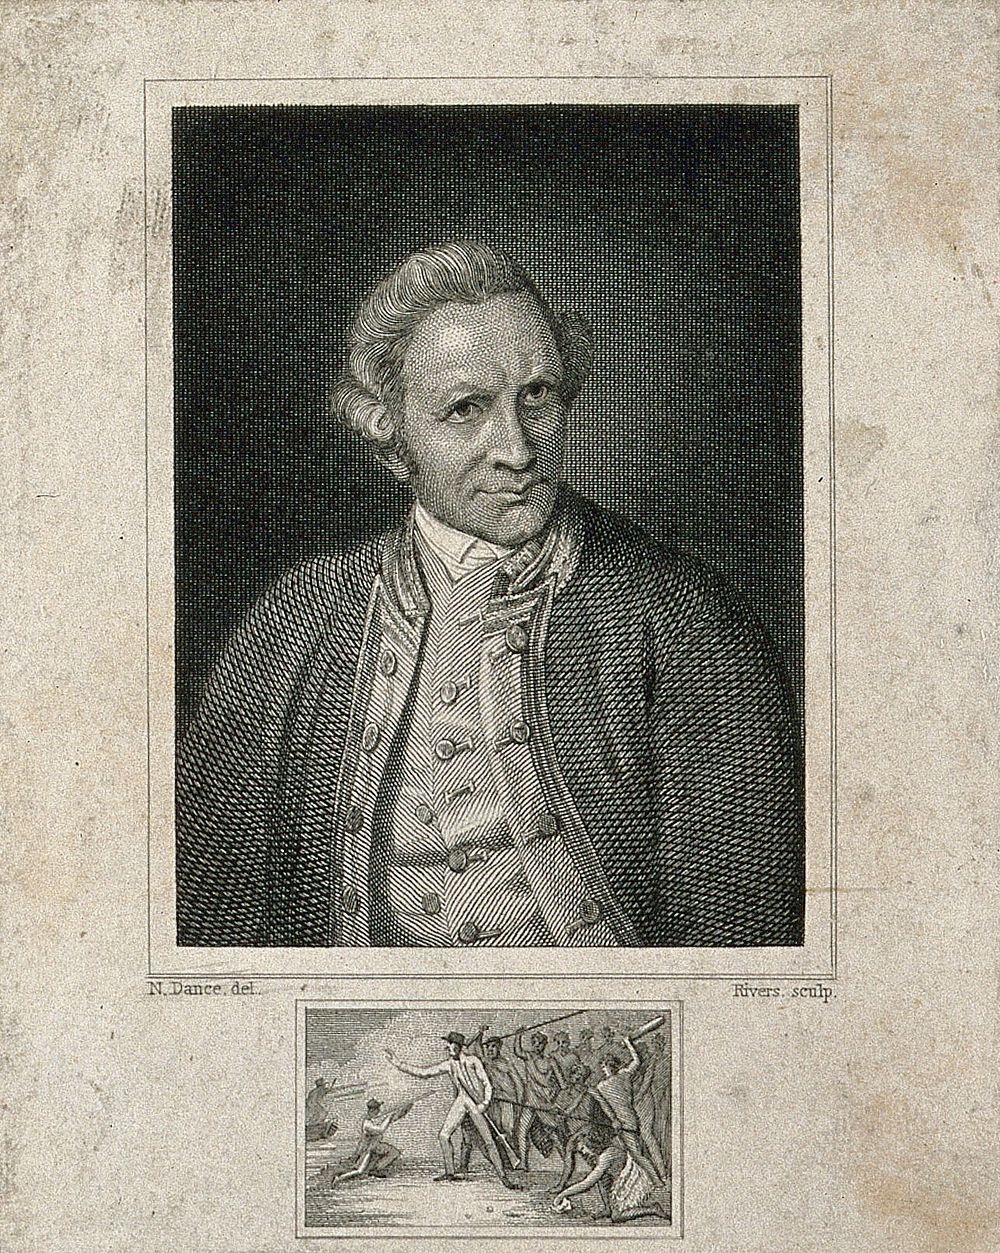 James Cook. Engraving by Rivers after Sir N. Dance-Holland, 1776.